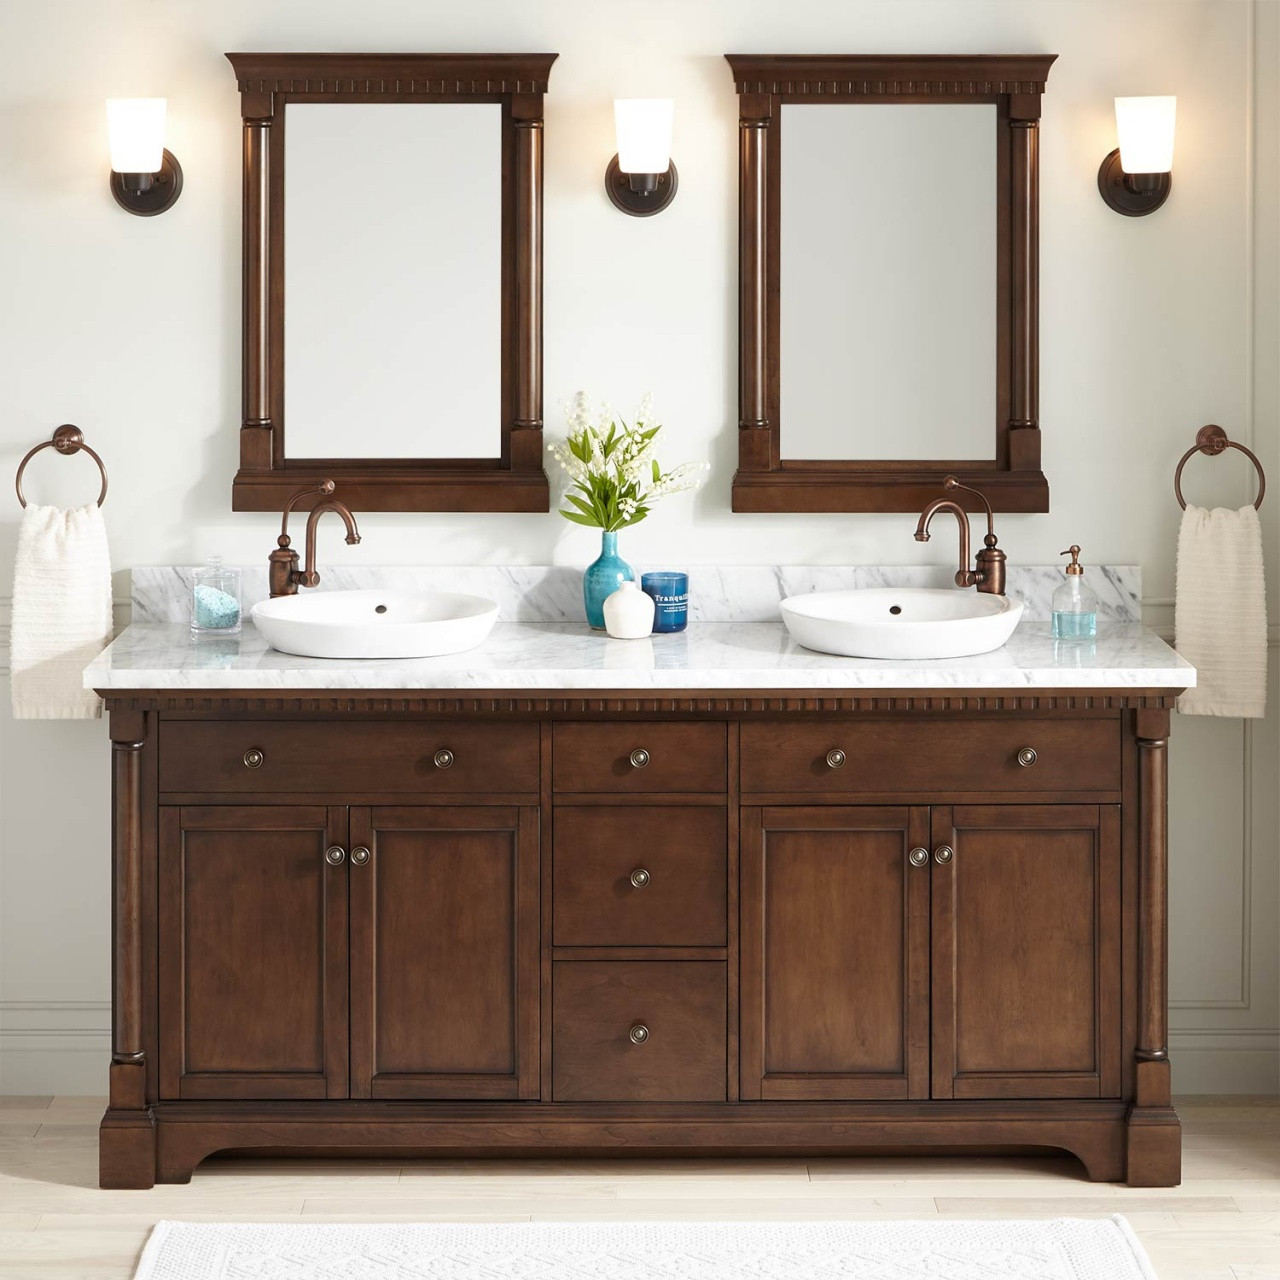 Home Depot Bathroom Vanity Clearance Unique Red and Black Bathroom Decor – Go Green Homes